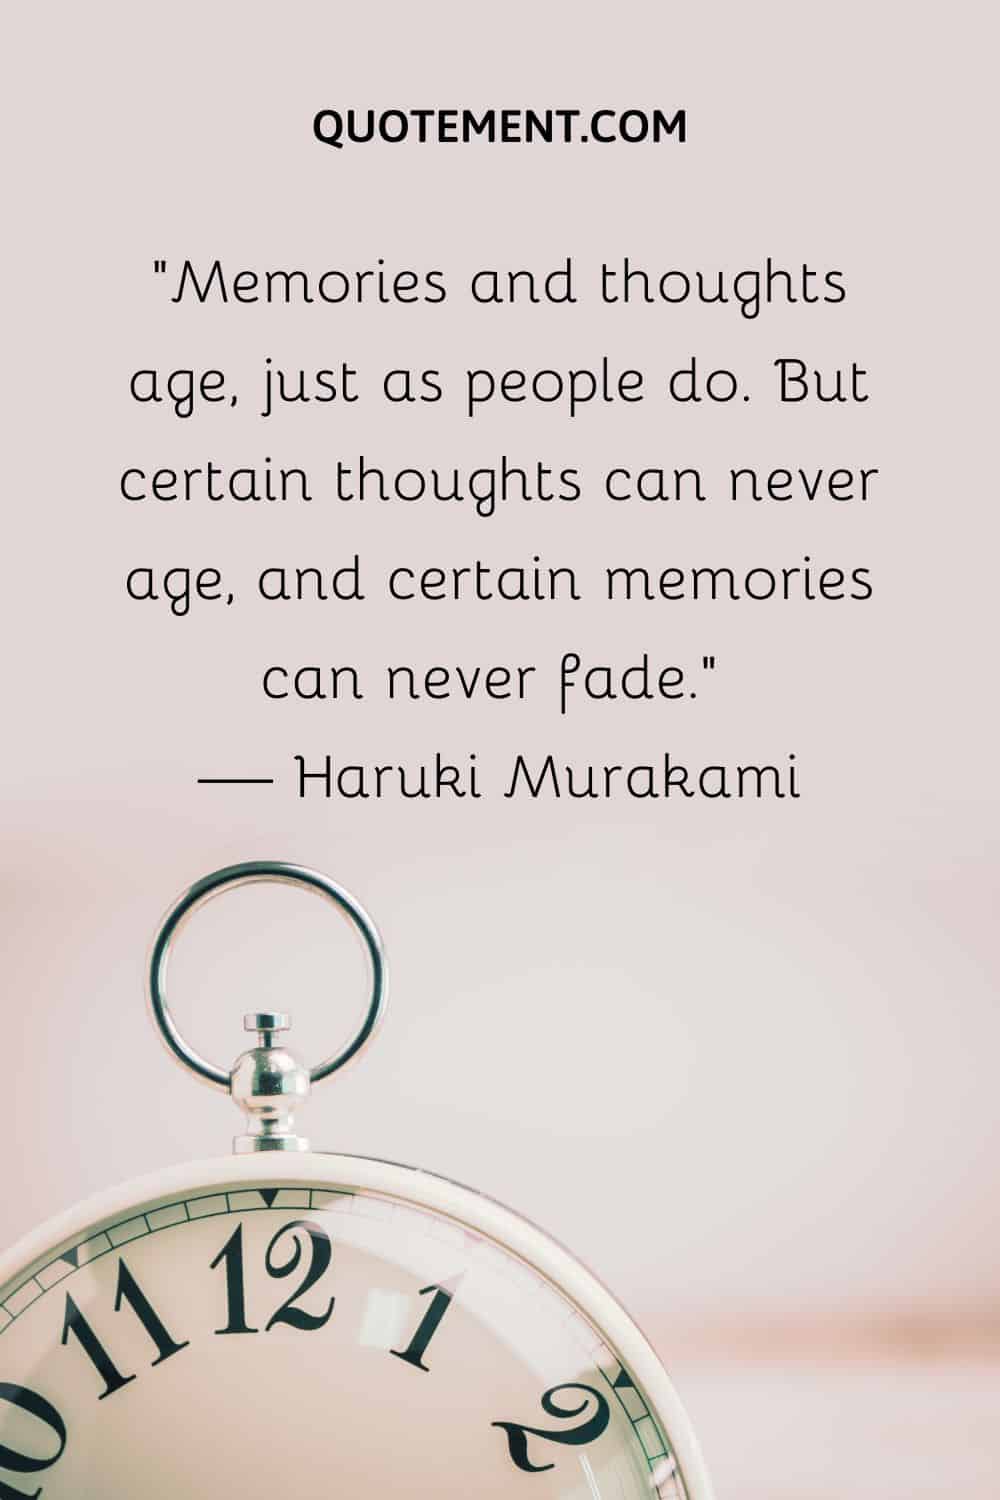 Memories and thoughts age, just as people do.